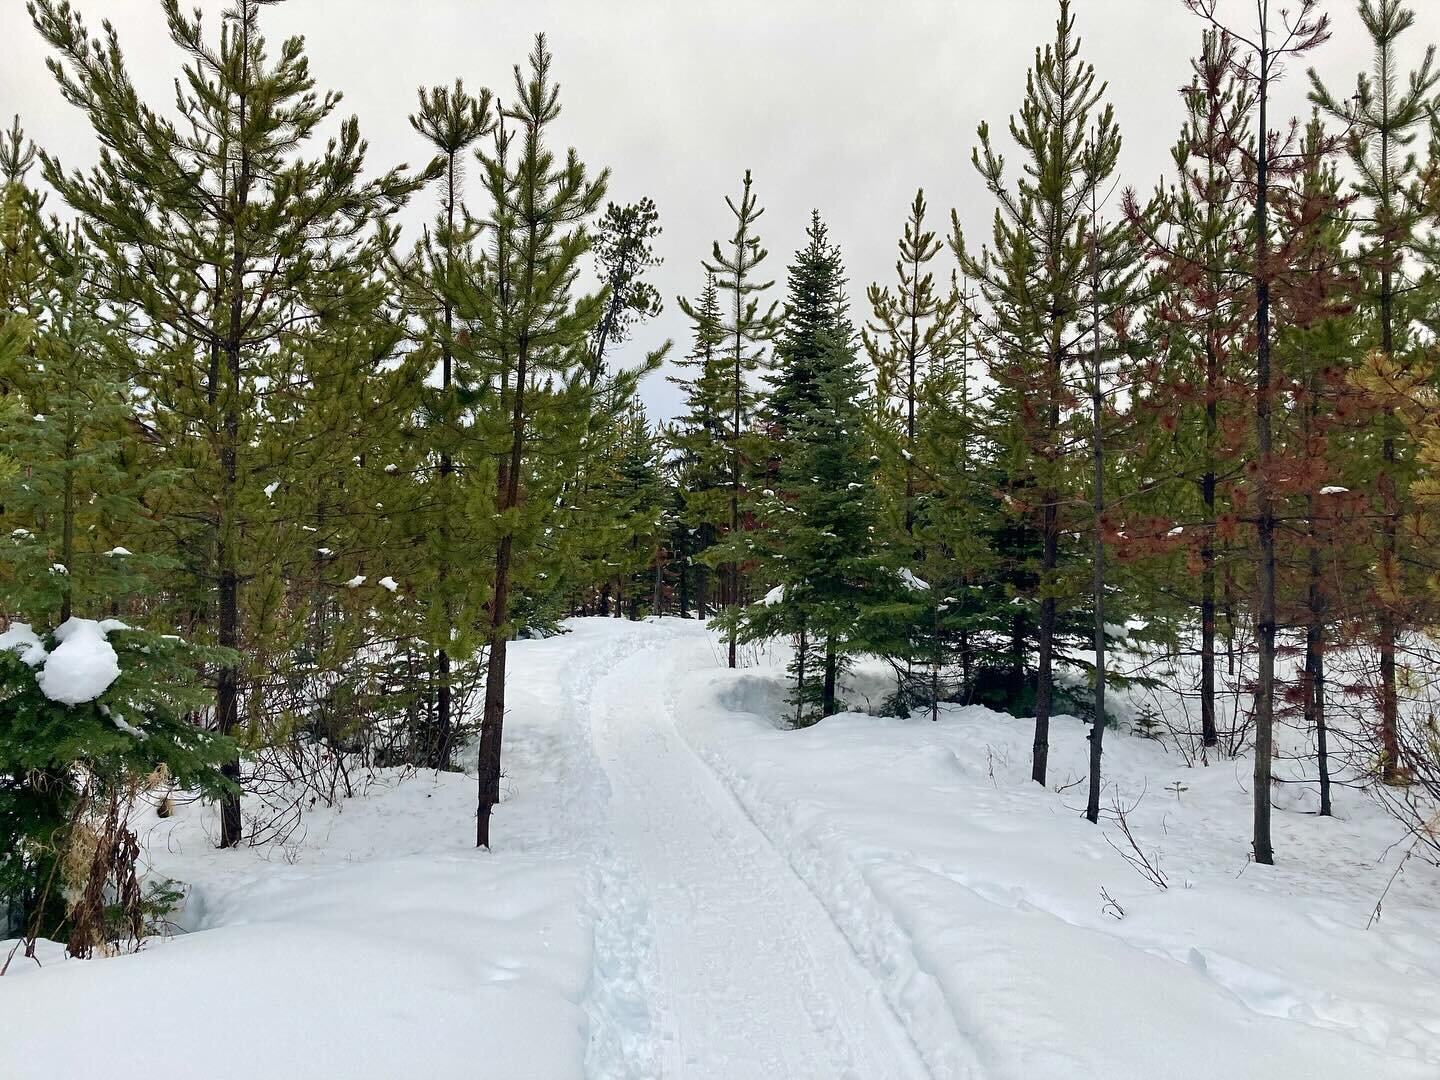 The weather outside is frightful, but the Azan Tunneh is delightful! 

Grooming and unseasonably warm weather have helped to pack in the trail, so conditions are perfect for snowbiking or trail running 🚲

#morata #moratamackenzie #mackenziebc #azant